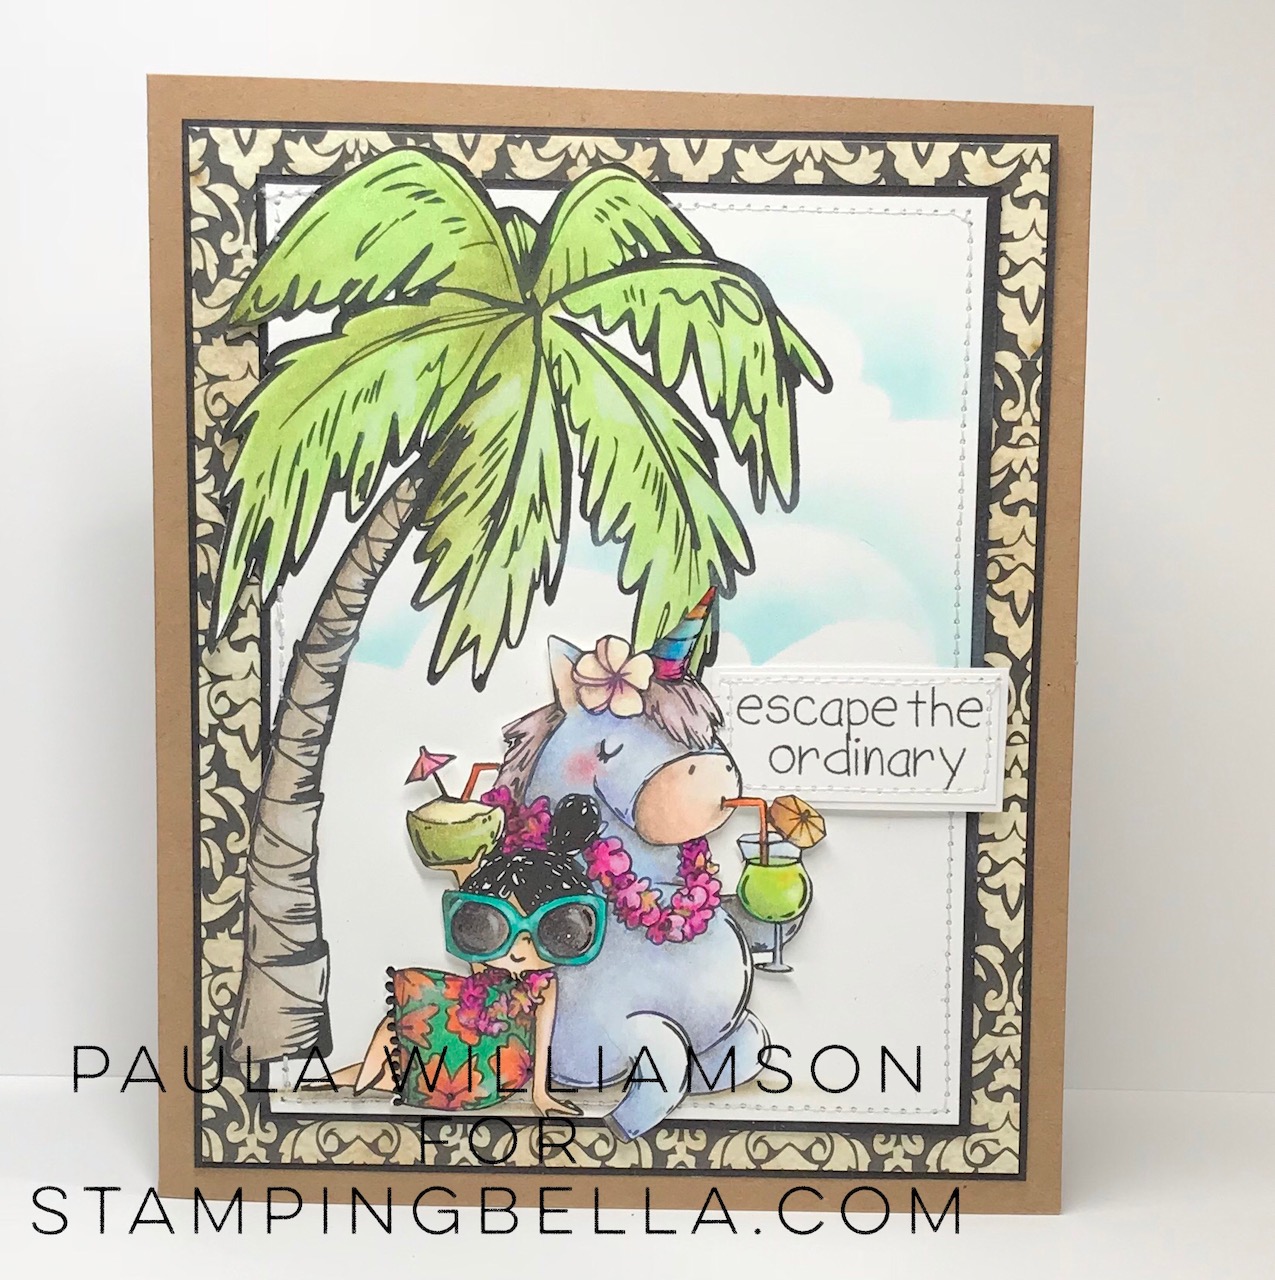 www.stampingbella.com: Rubber stamps used: Rosie and Bernie in Hawaii, Rosie and Bernie's PALM TREE, and our Adventure Sentiment Set CARD BY Paula Williamson